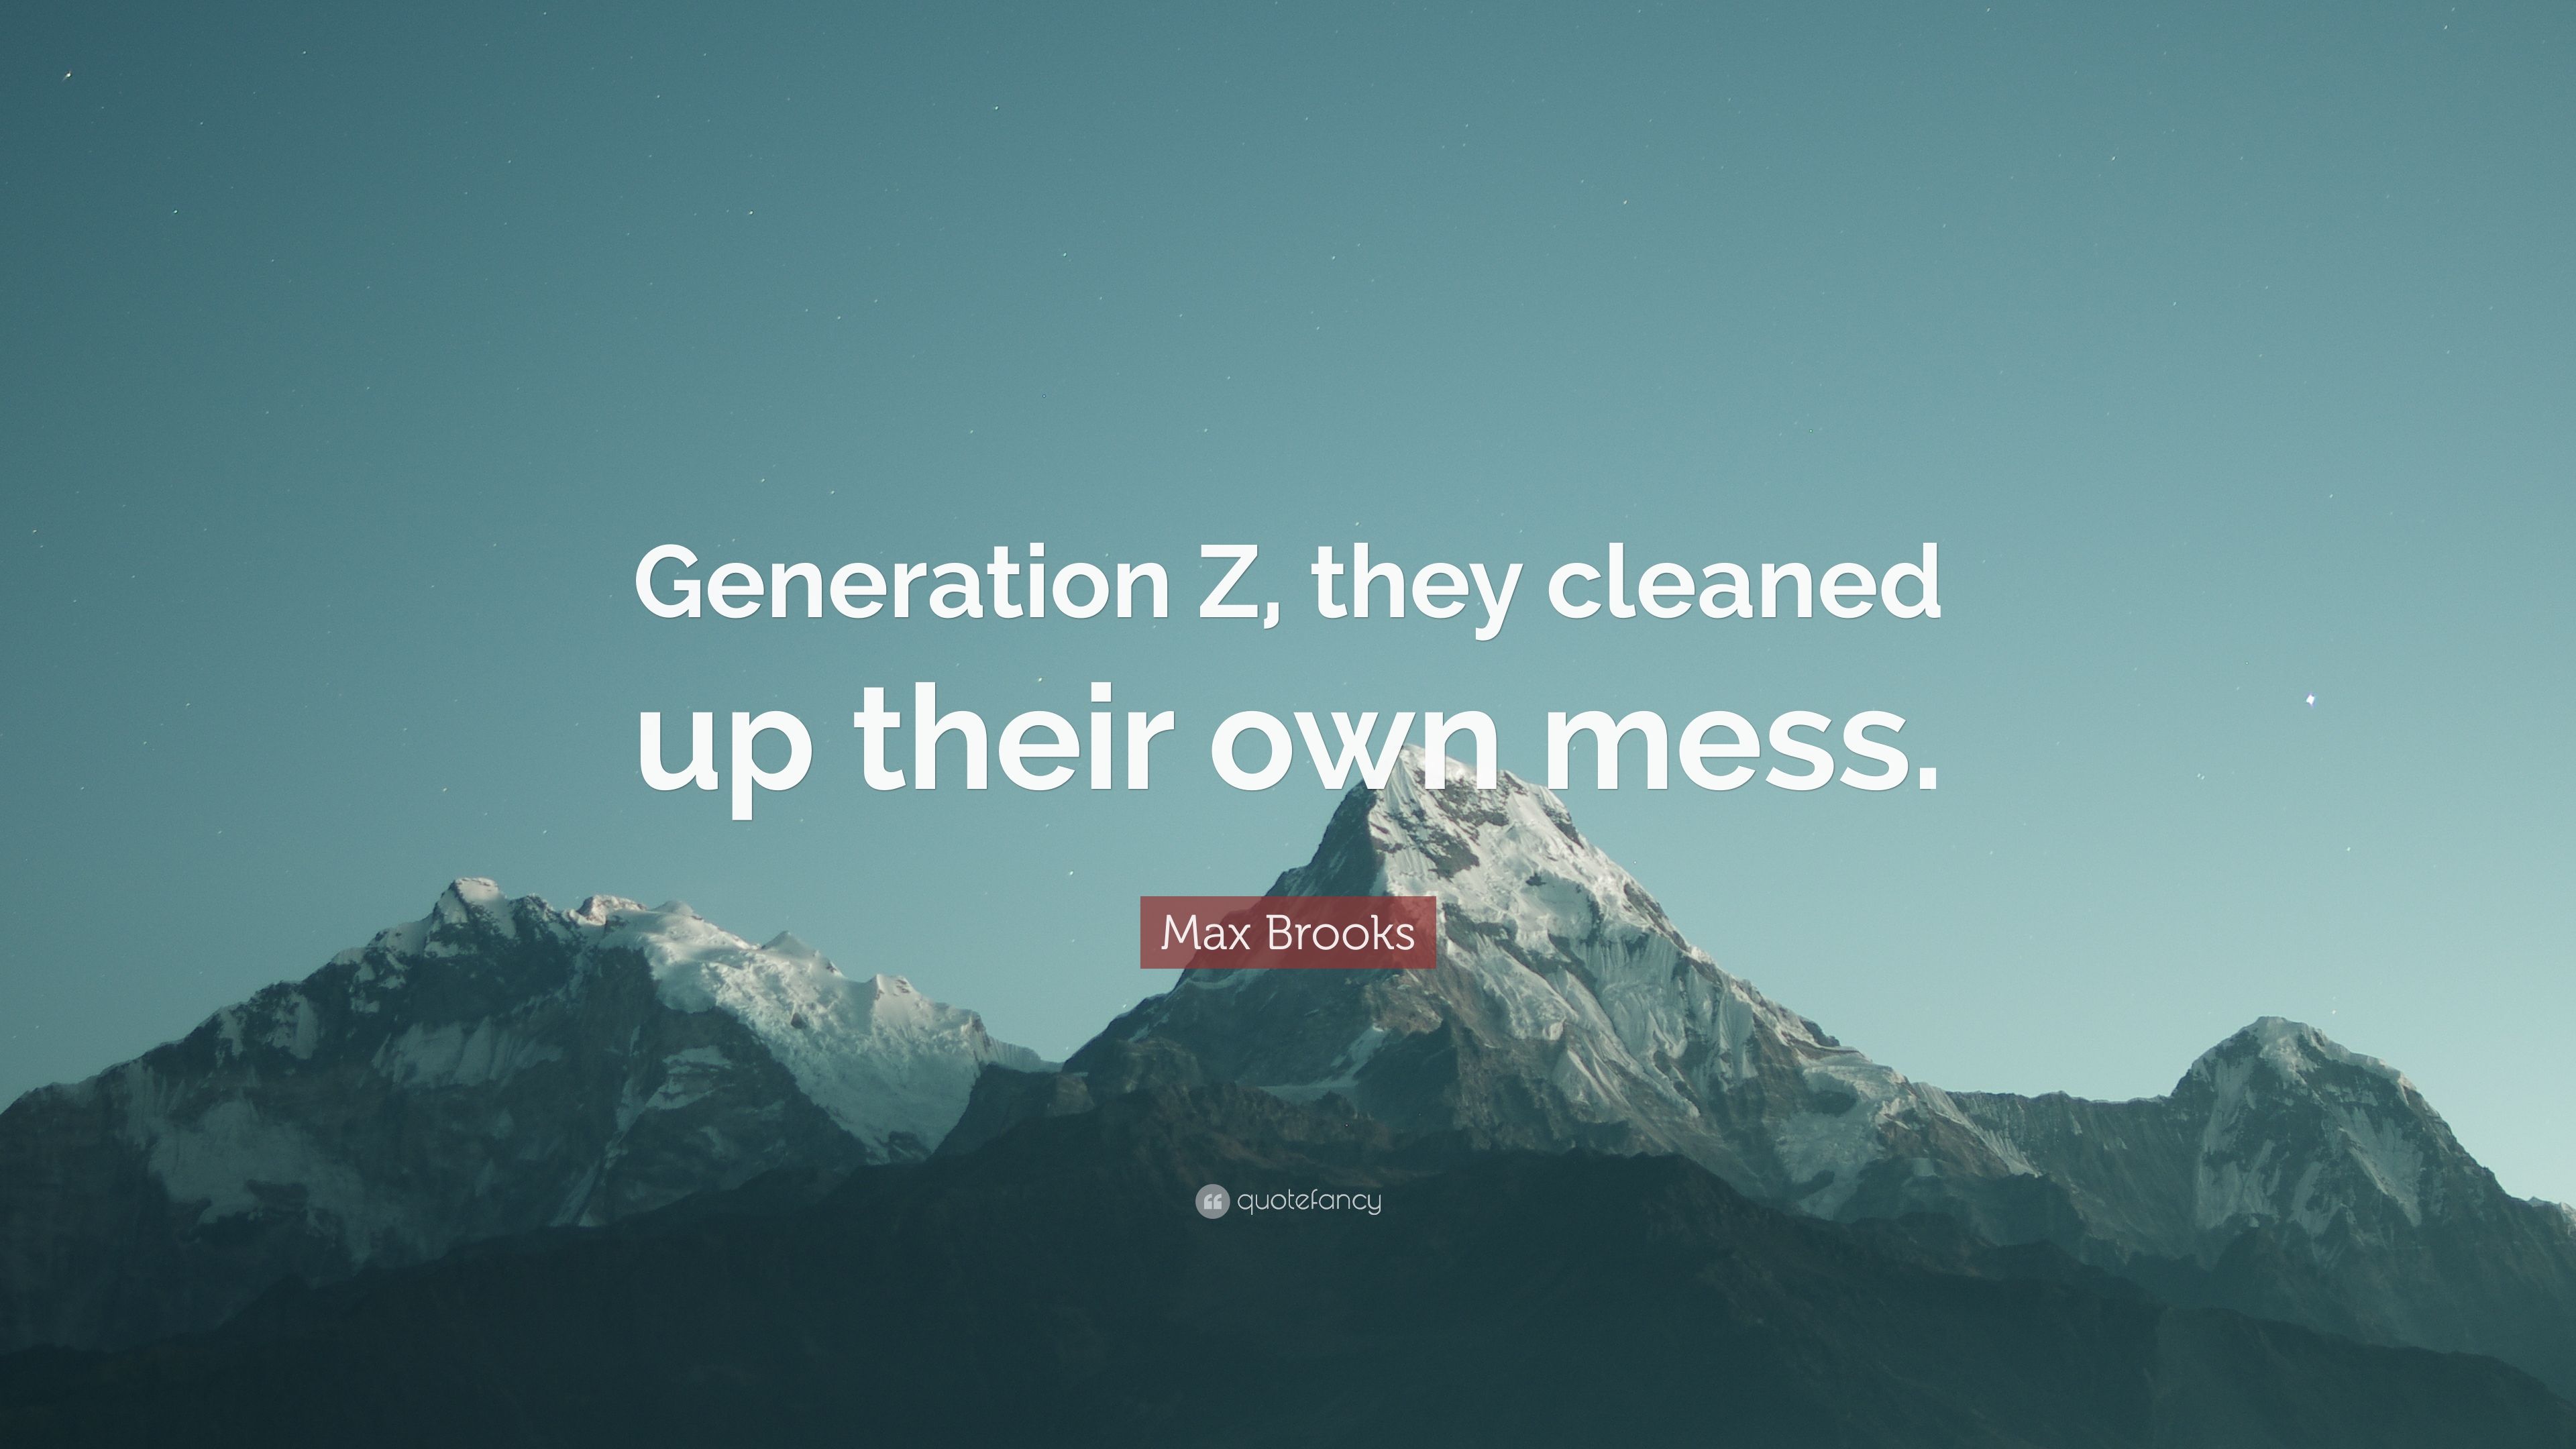 Max Brooks Quote: “Generation Z, they cleaned up their own mess.” (7 wallpaper)